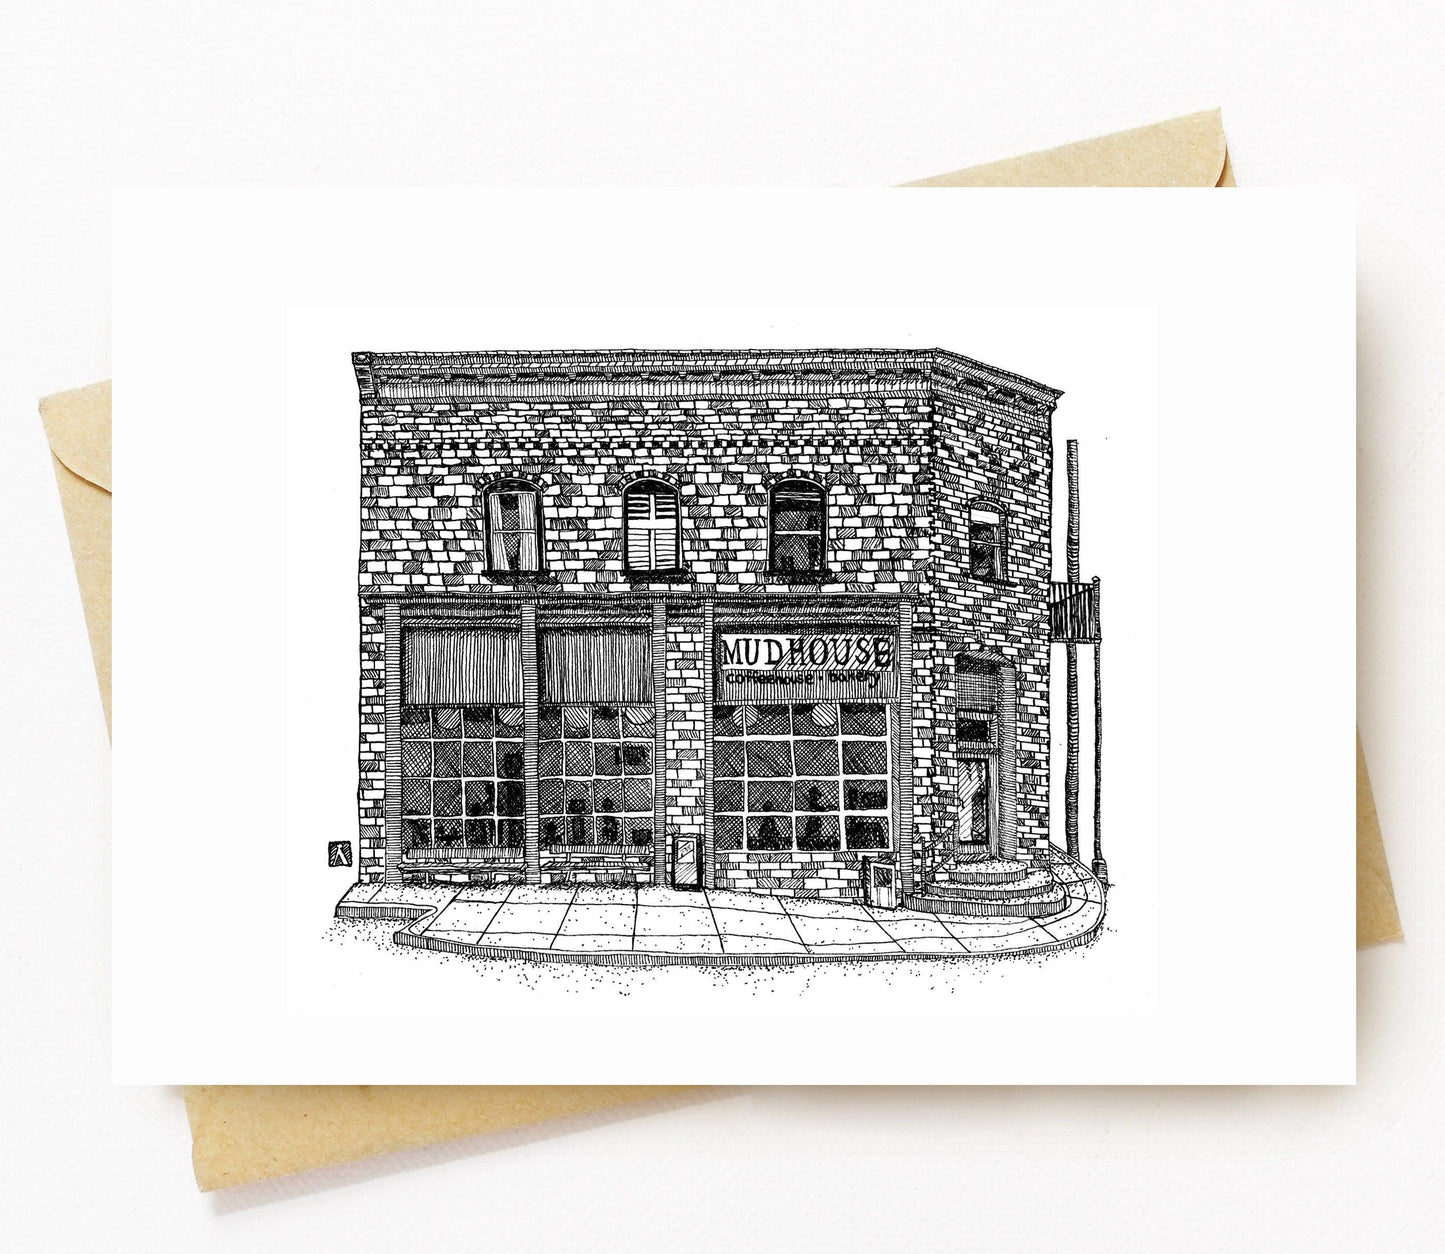 BellavanceInk: Greeting Card With A Pen & Ink Drawing Of The Mudhouse Cafe In Crozet Virginia 5 x 7 Inches - BellavanceInk